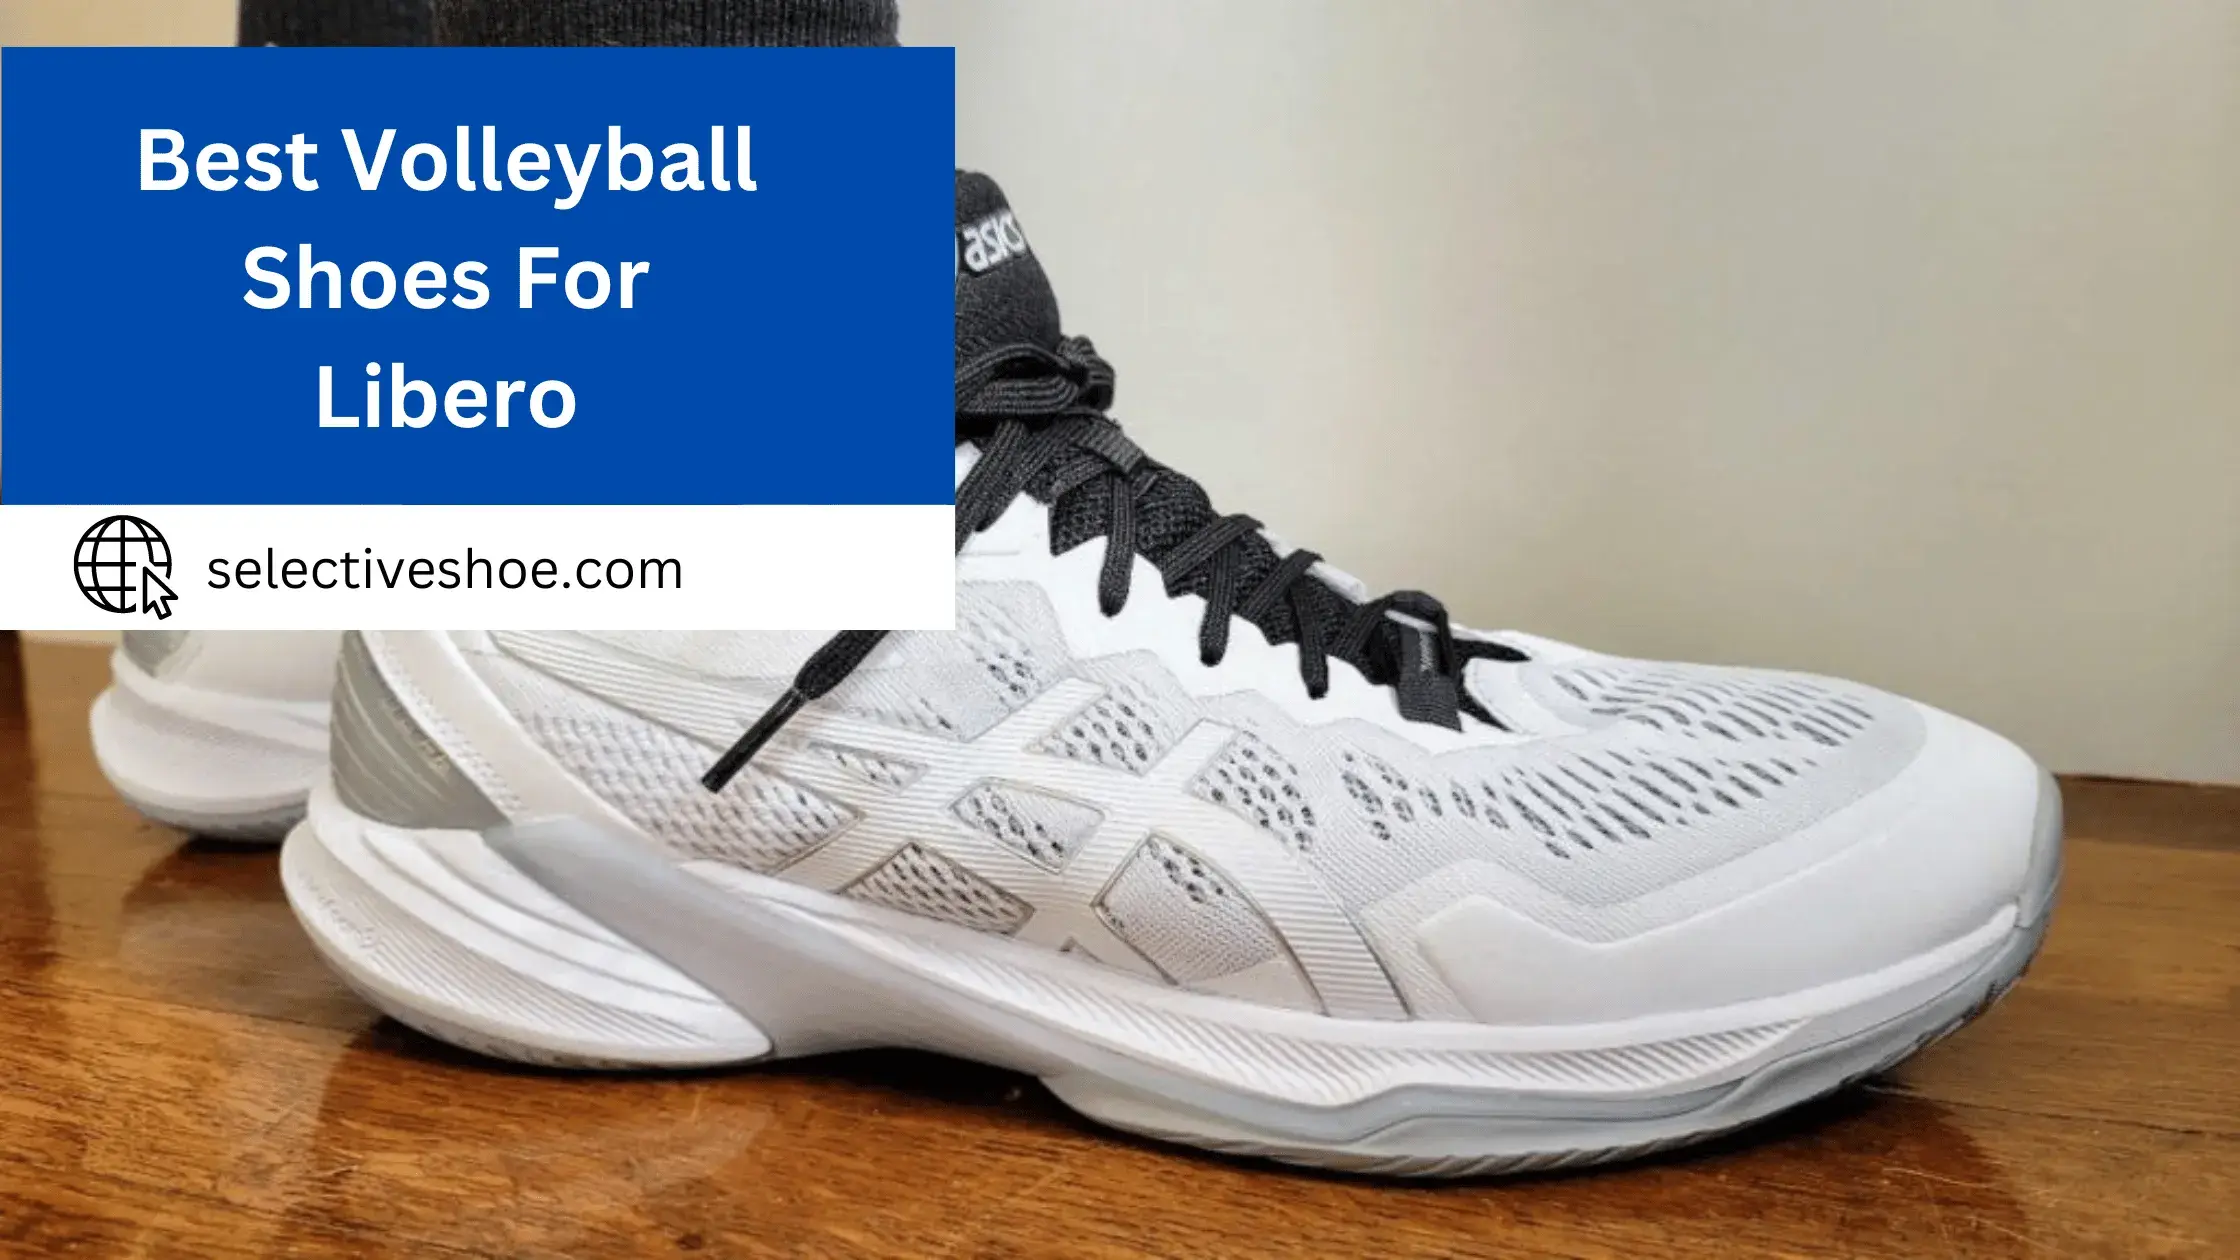 Best Volleyball Shoes For Libero - A Comprehensive Guide